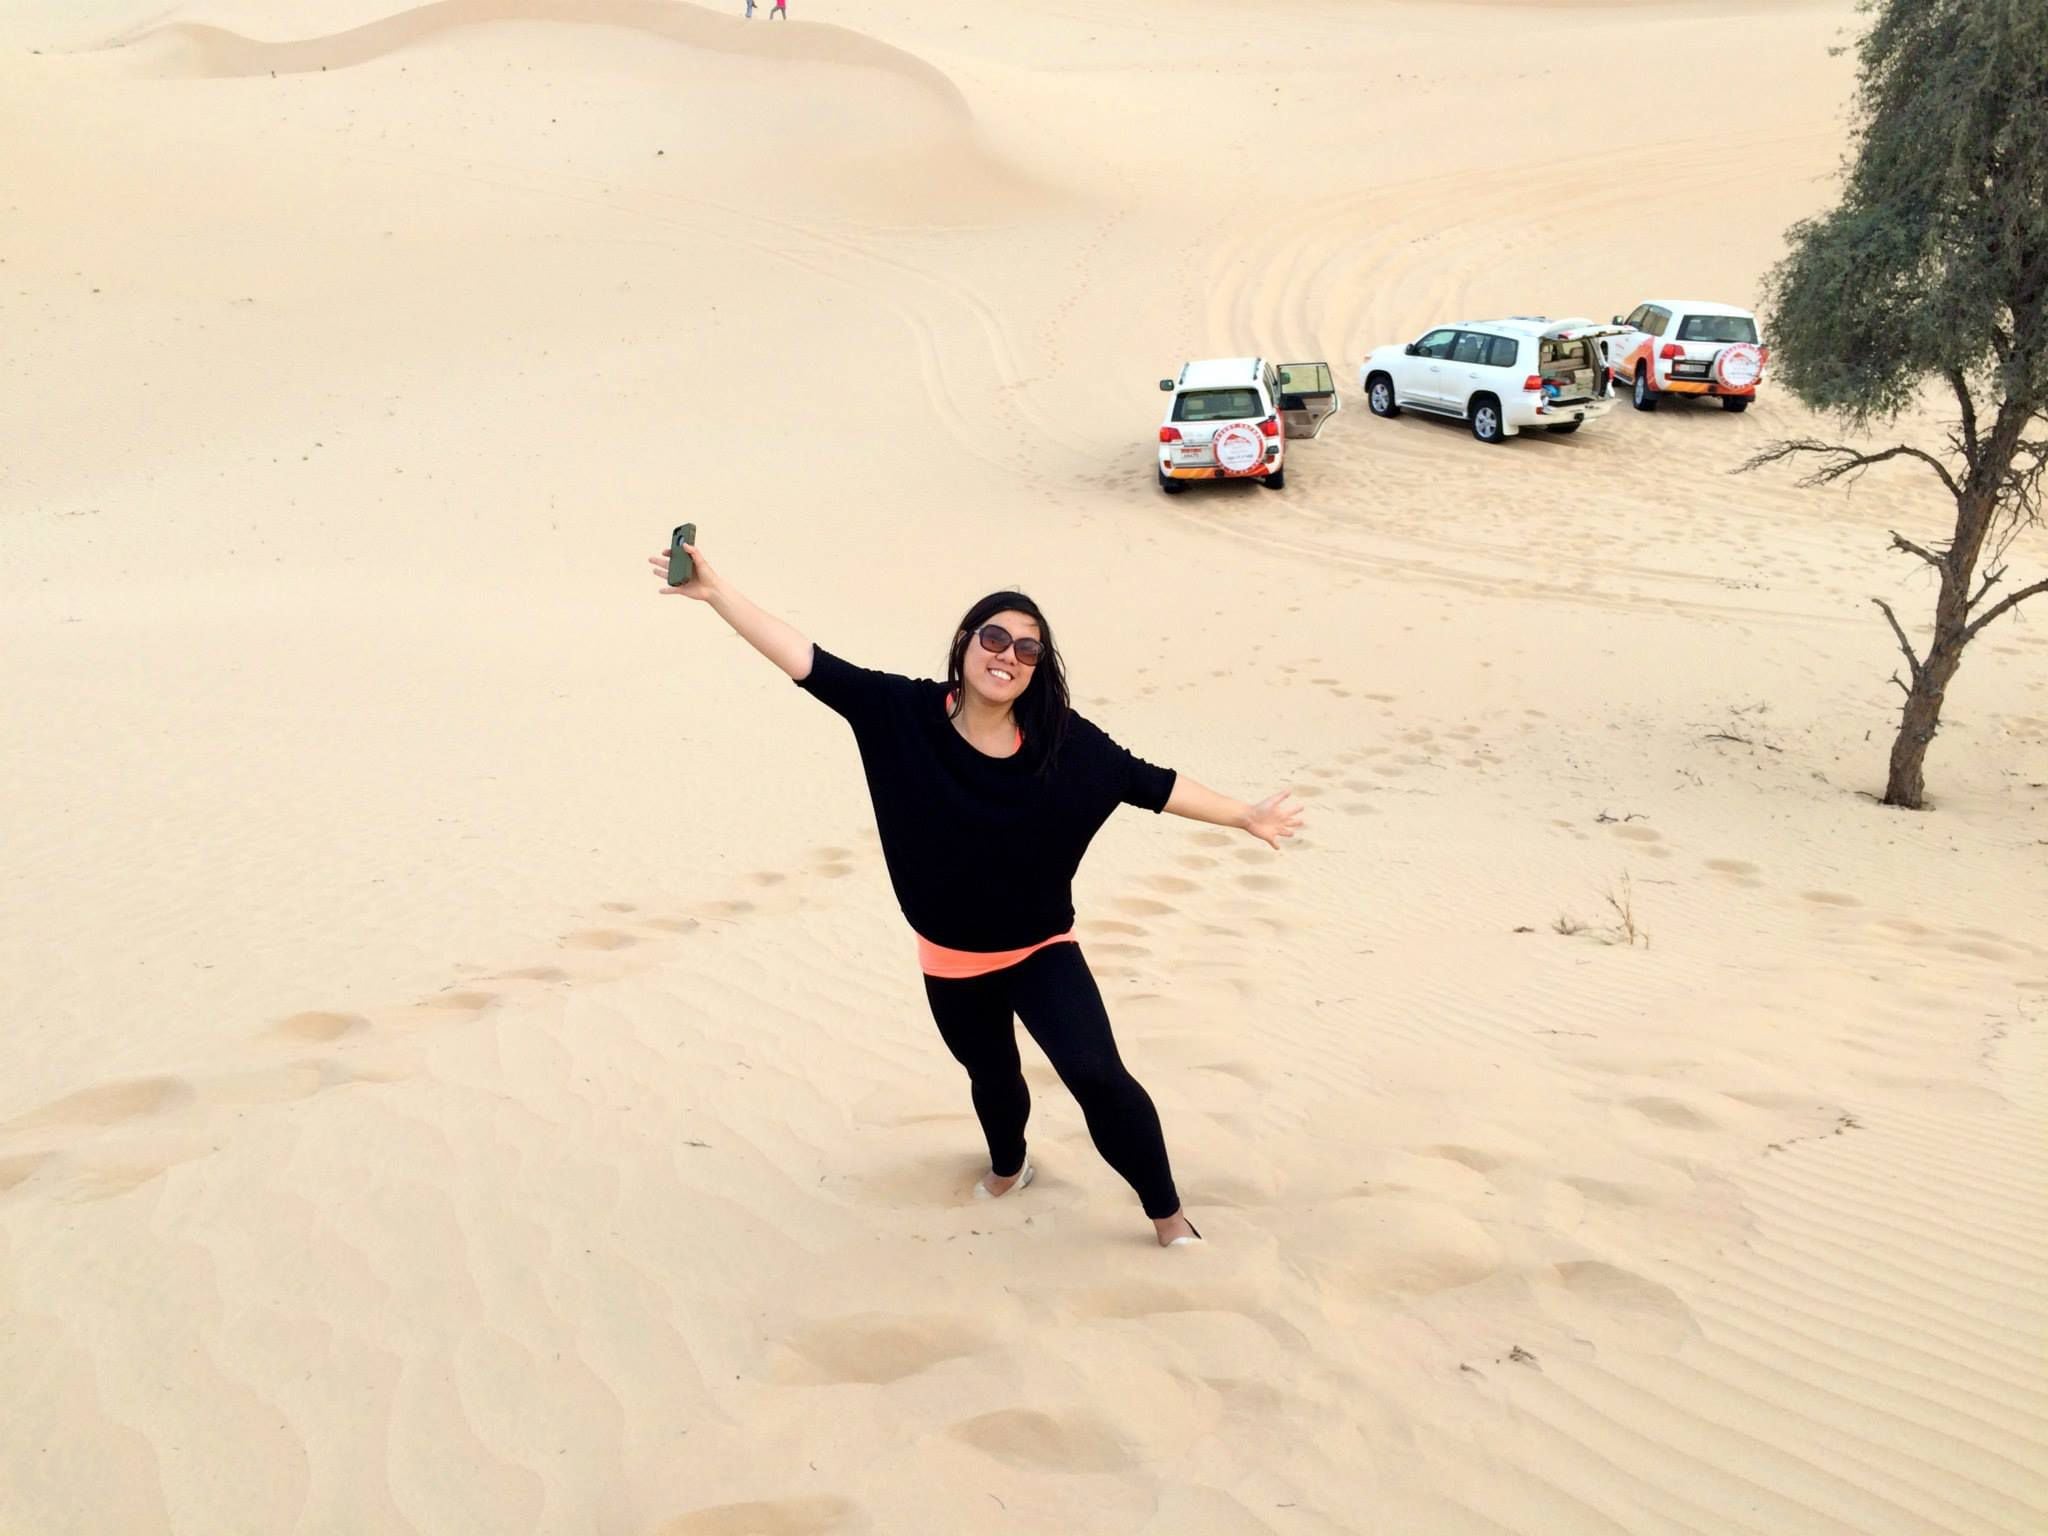 after 10 years in abu dhabi, i'm in no hurry to leave – and here's why